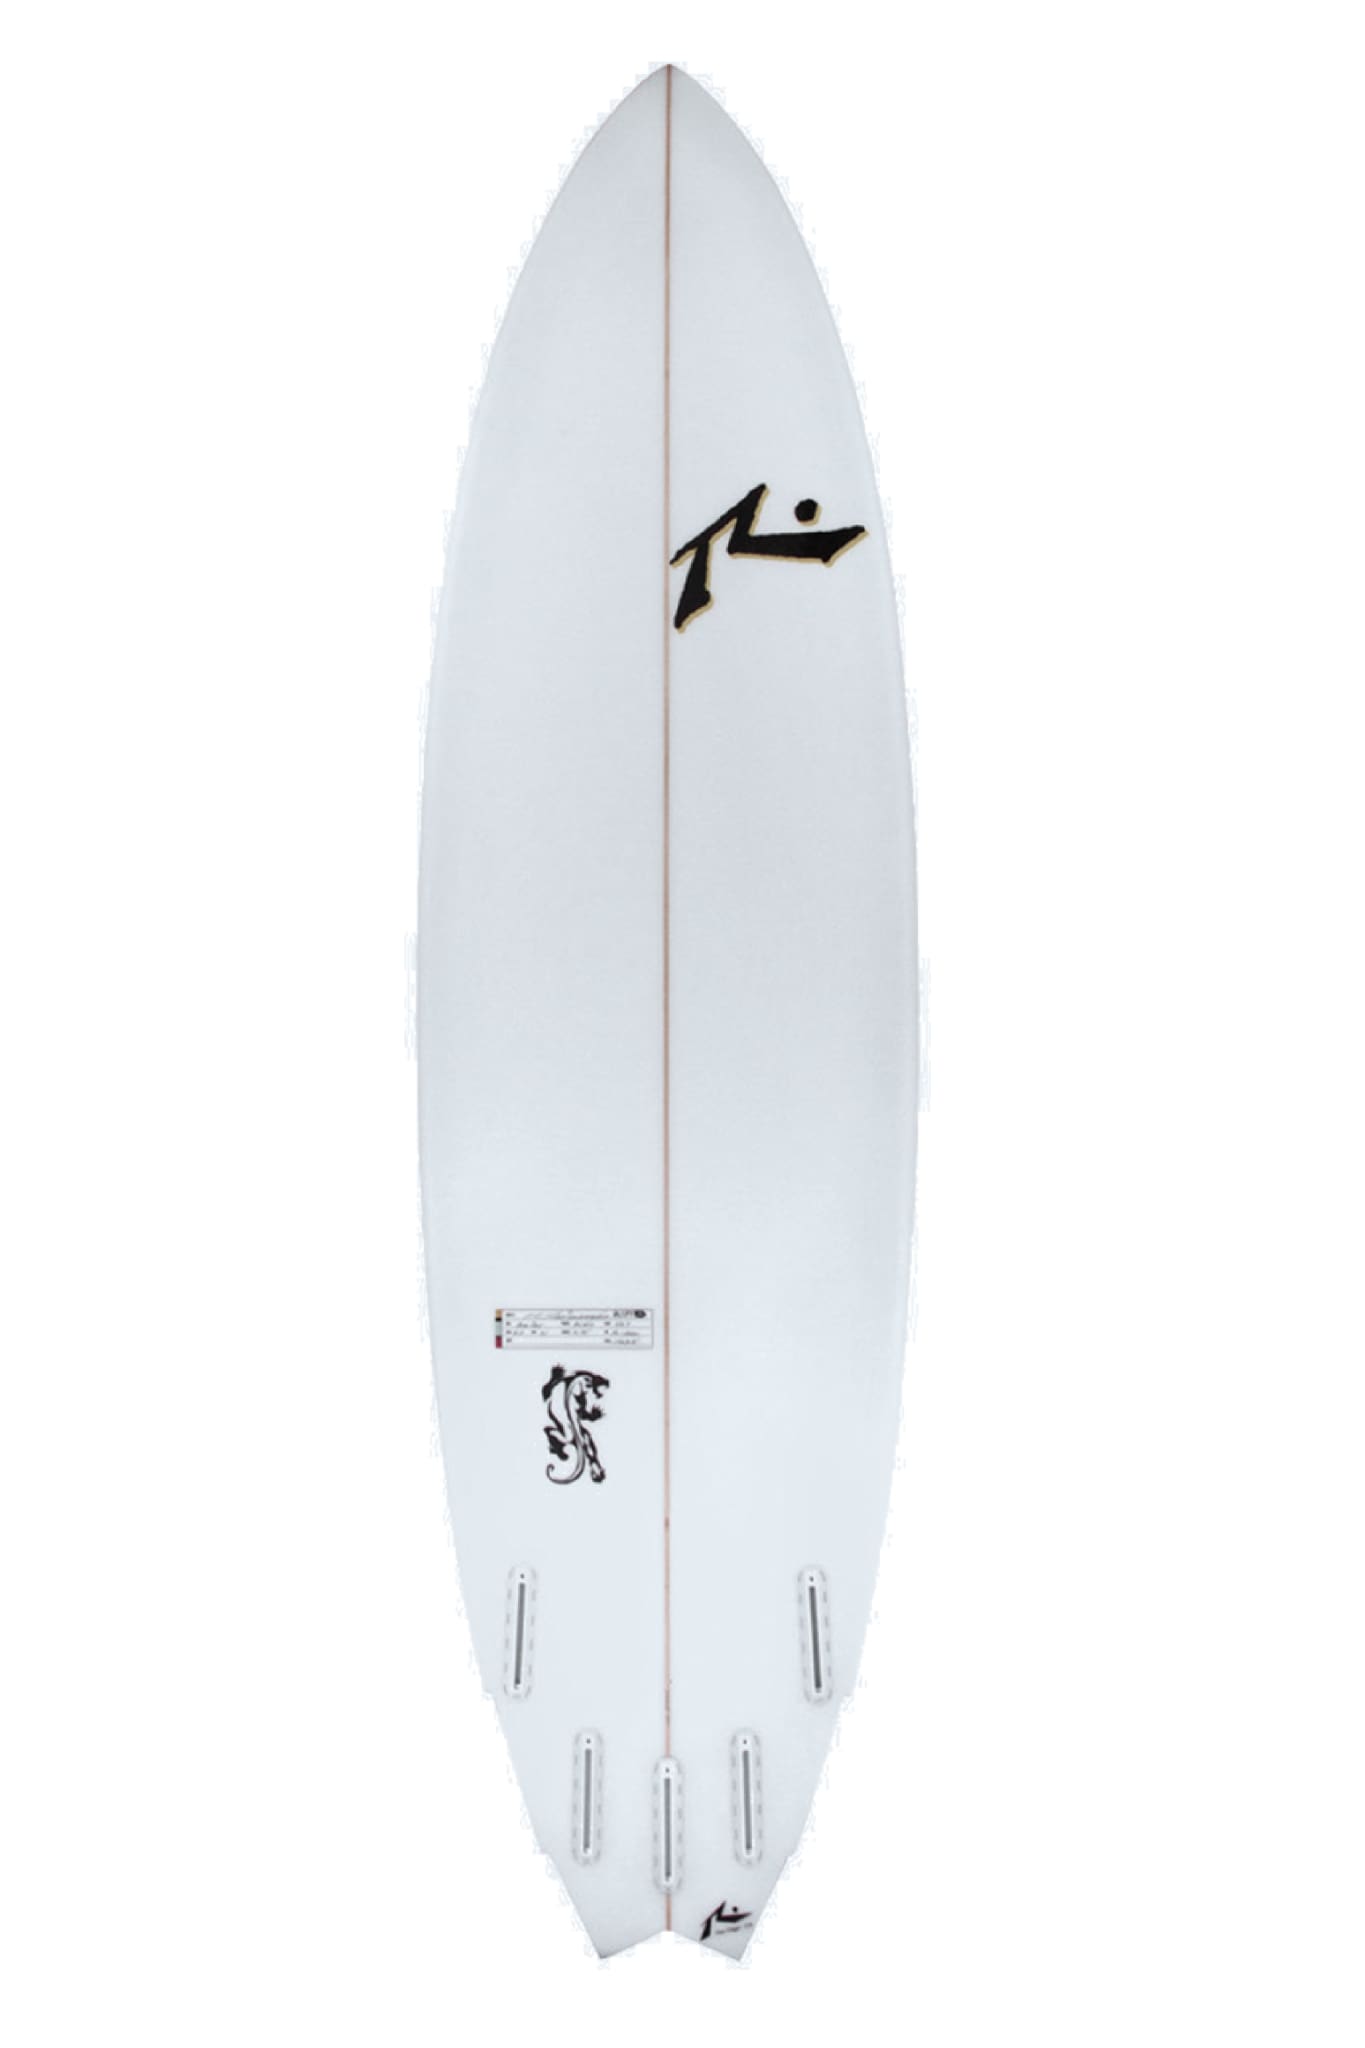 Big Cat | Surfboards-Rusty Surfboards South Africa